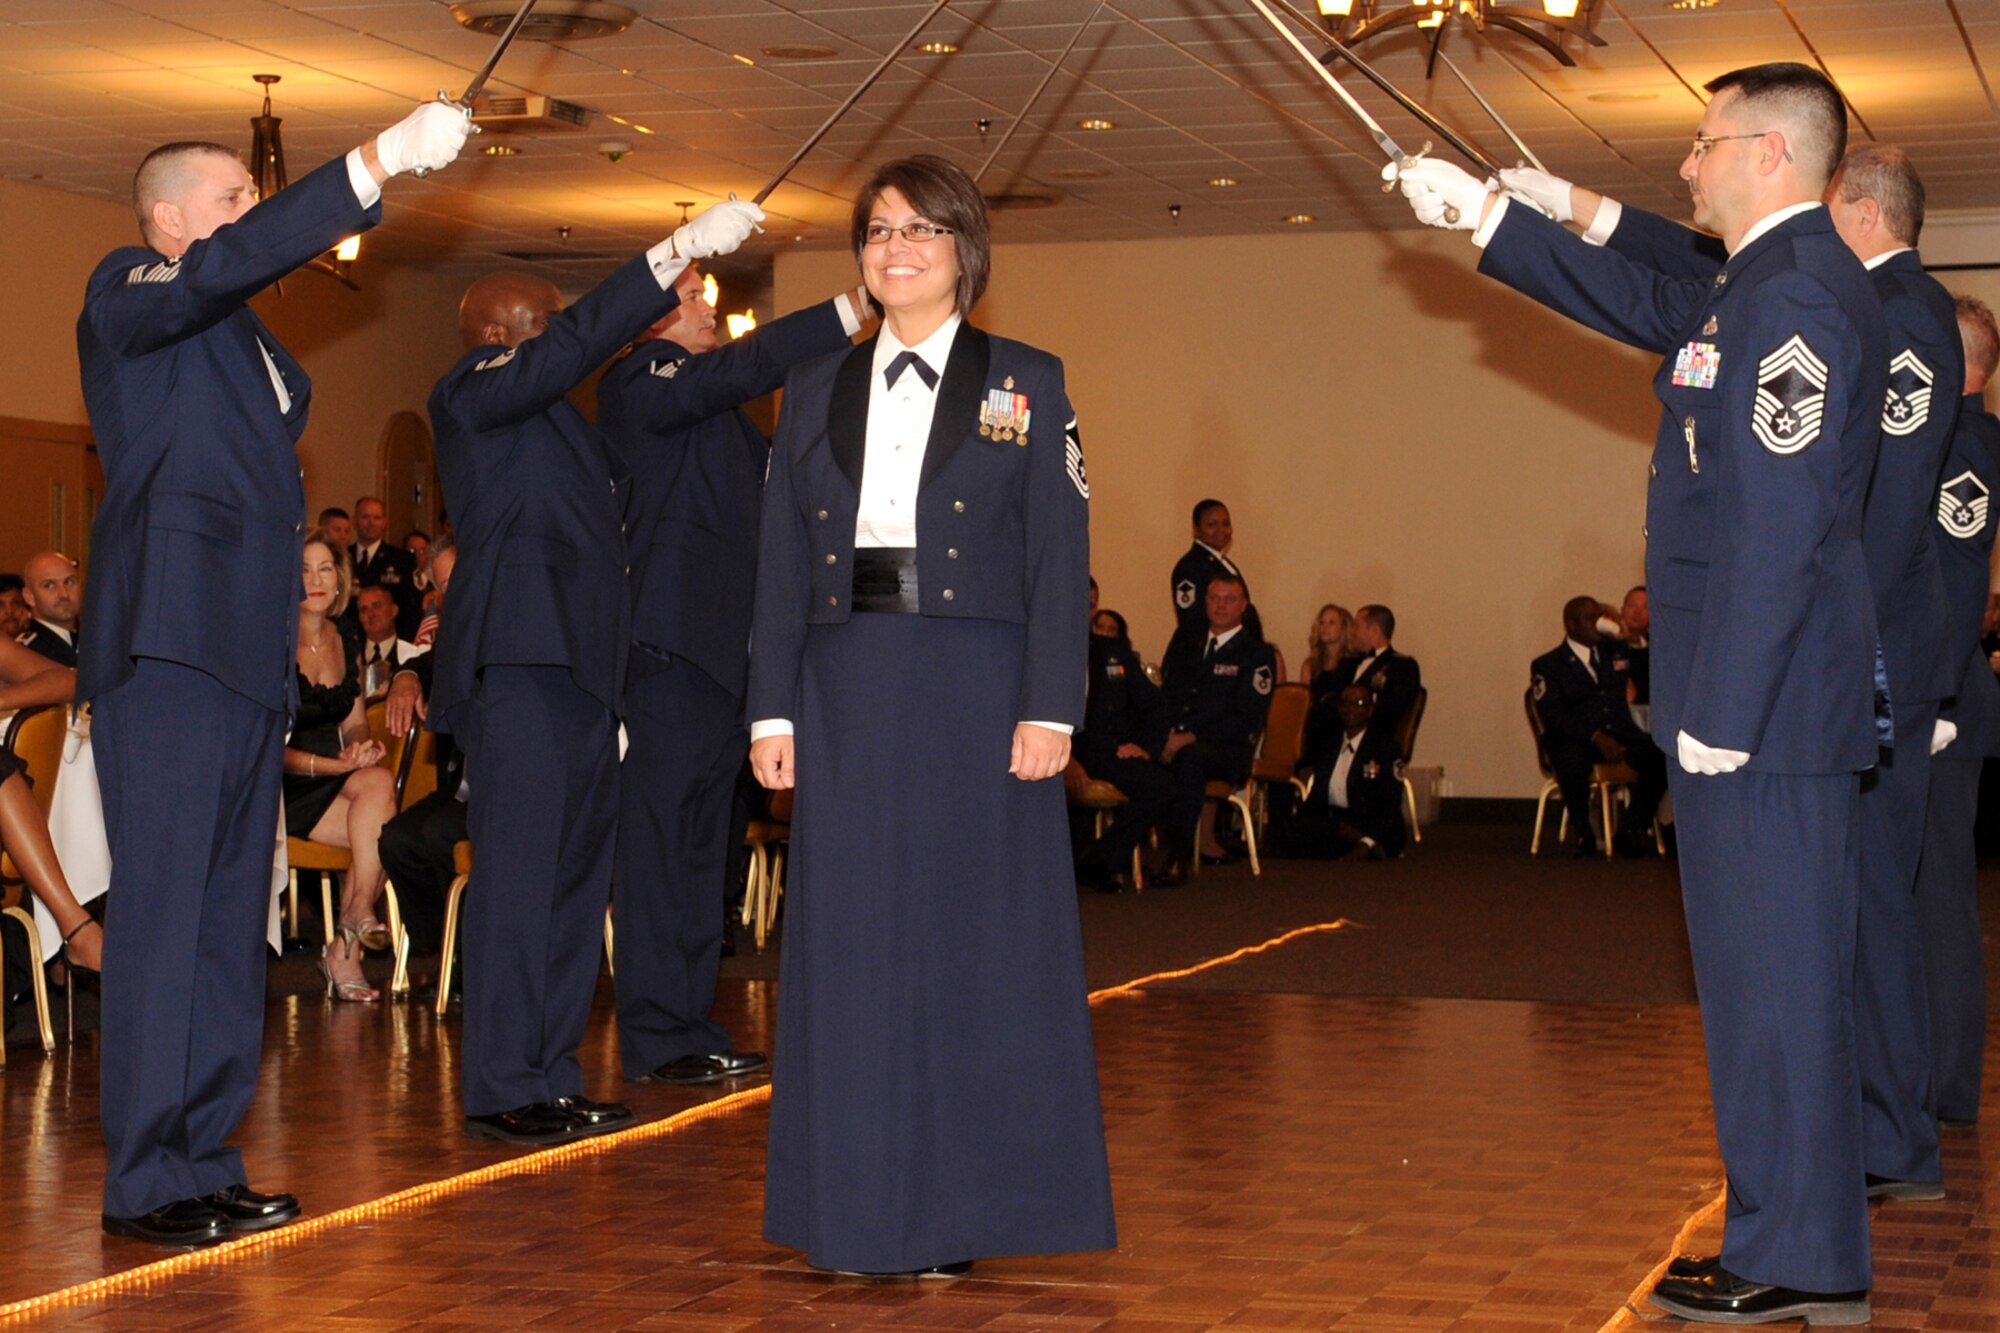 U.S. Air Force Master Sgt. Partricia Gonzales passes underneath a sword cordon during the Senior Noncommisioned Officer Induction Ceremony at Barksdale Air Force Base, La., Sept. 10, 2011. The ceremony is held annually to recognize newly promoted Master Sgts. within the 307th BW, 917th Fighter Group and the 307th Rapid Engineer Deployable Heavy Operations Repair Squadron Engineers. (U.S. Air Force photo by Master Sgt. Greg Steele/Released)